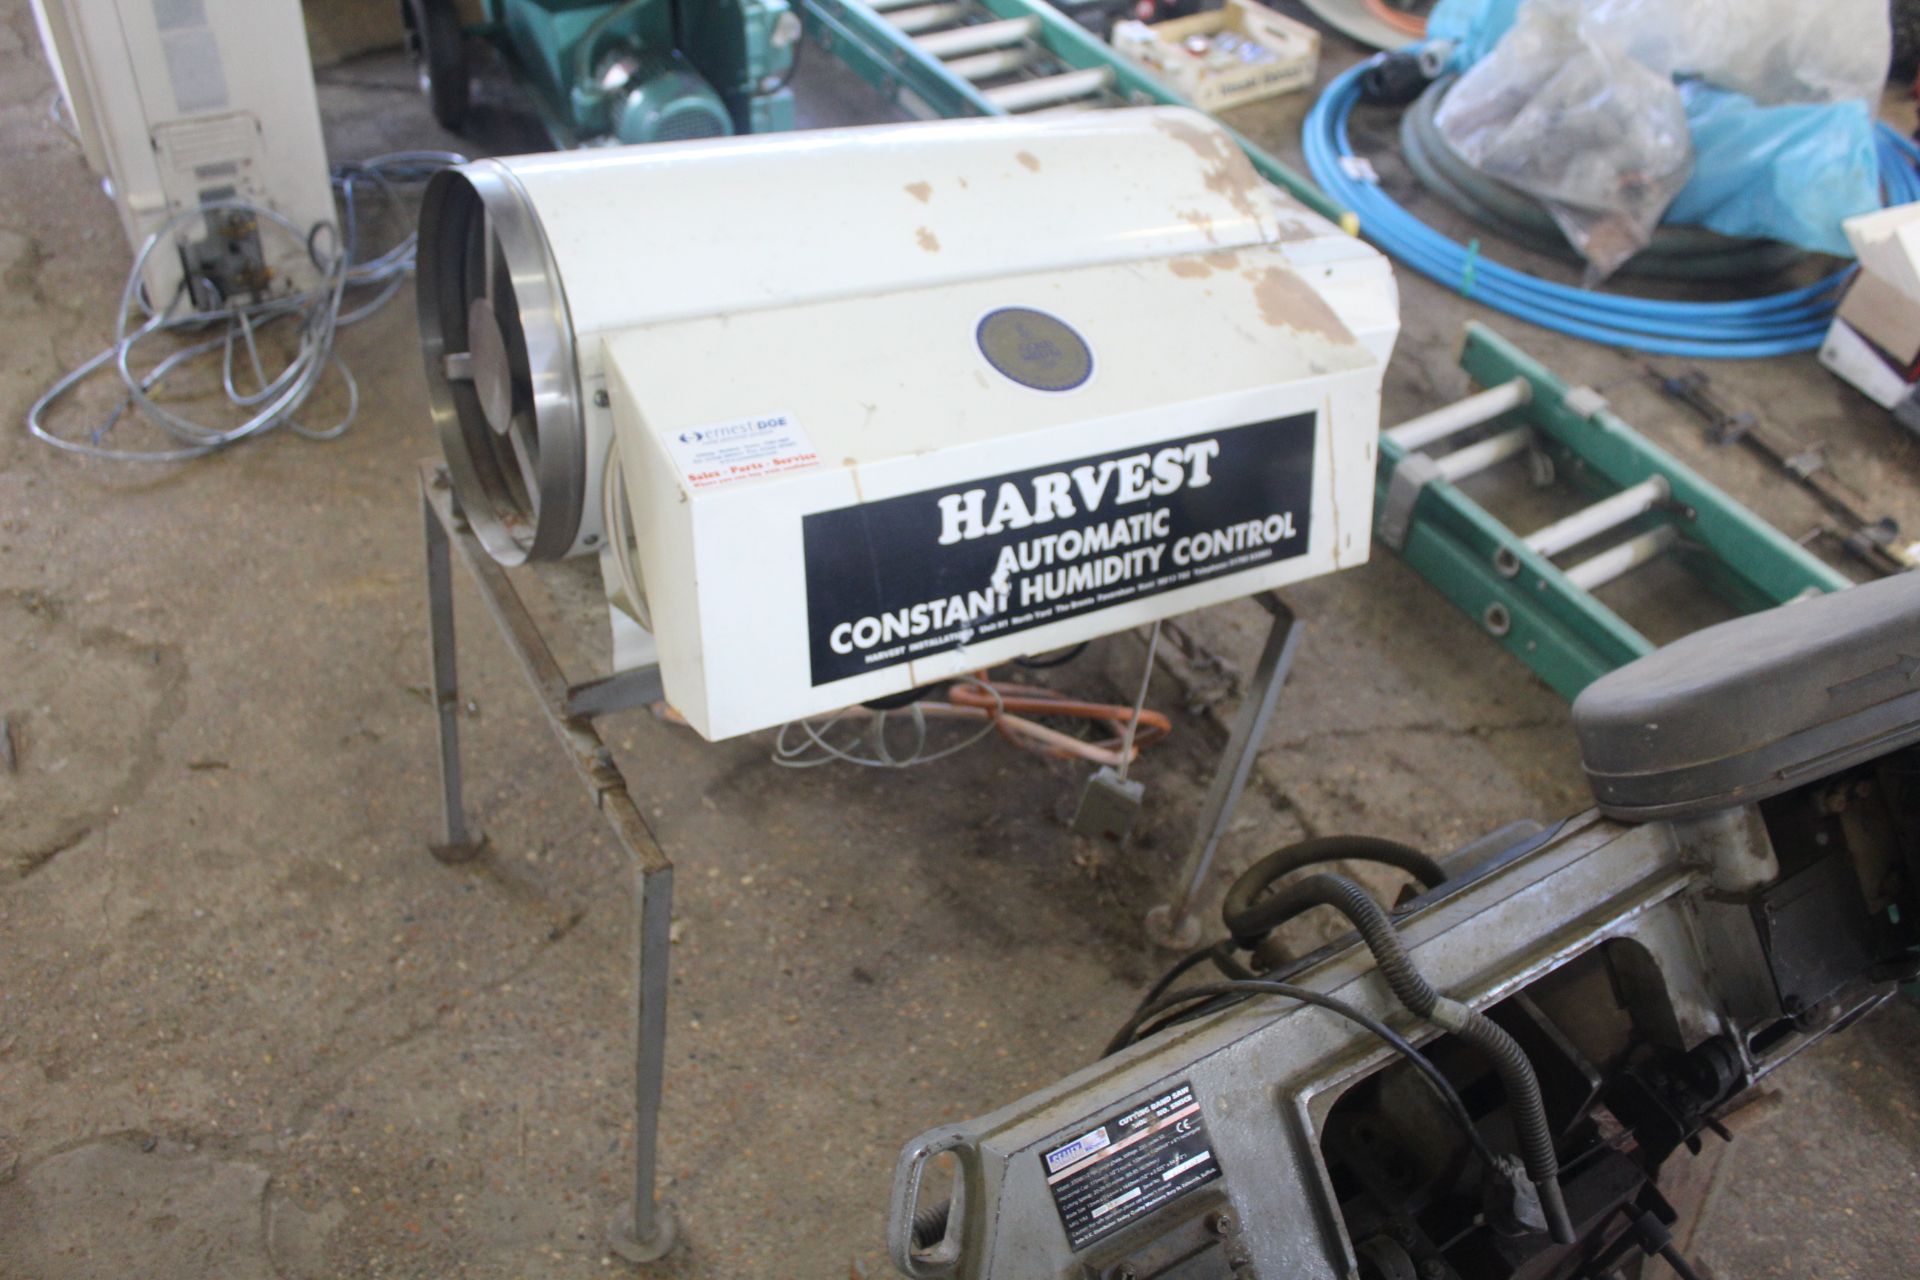 Harvest Automatic constant humidity control. From a Deceased estate. Manual held